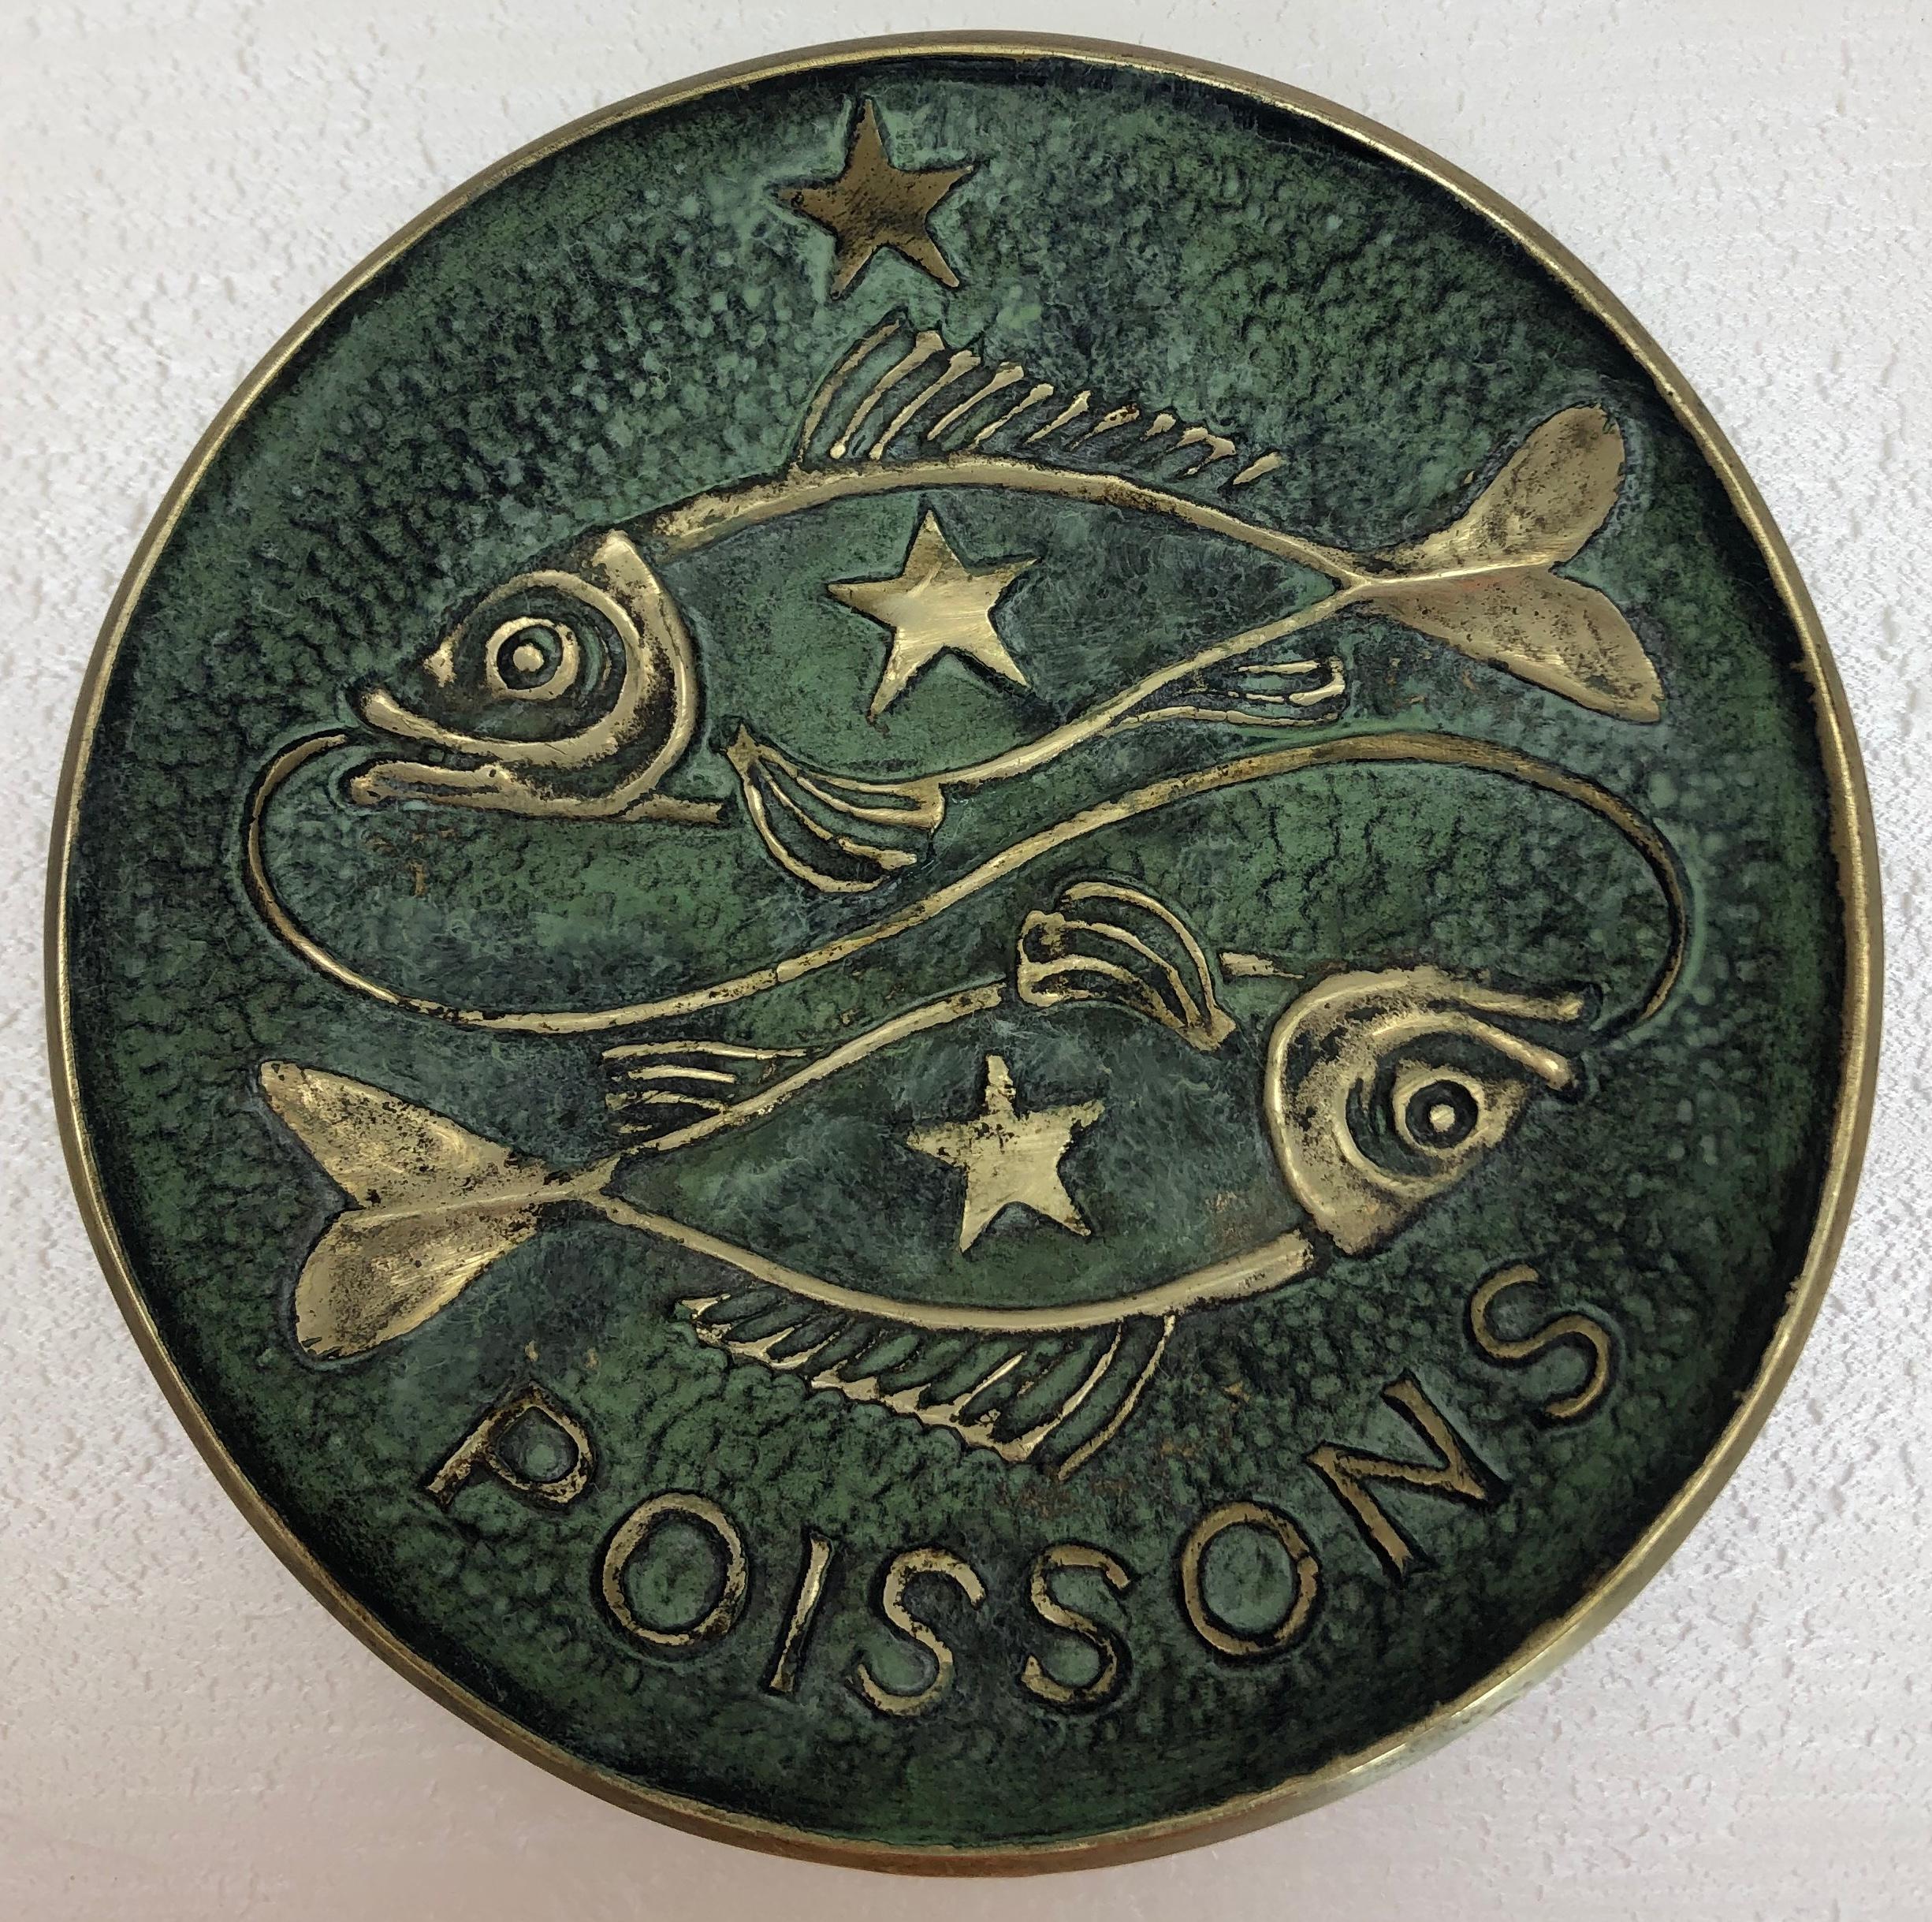 Bronze by Max Le Verrier that makes a great key holder/vide-poche.

The fish symbols are absolutely beautiful, they represent the zodiac sign of those born 21 February - 20 March as is indicated on the bottom of this charming decorative object.